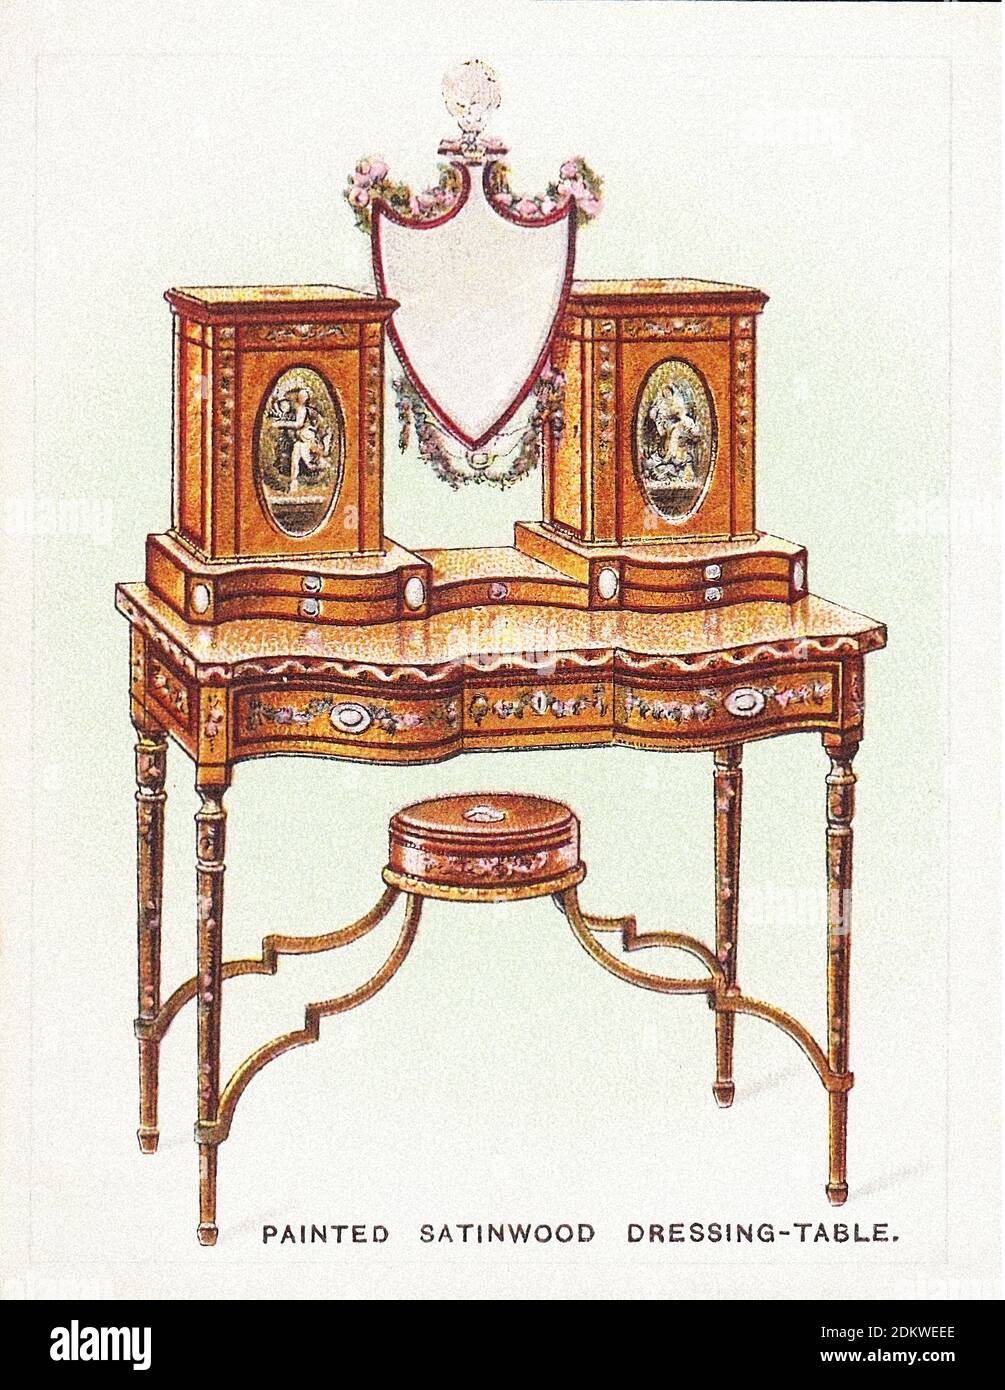 Antique cigarettes cards, Wills's Cigarettes cards (sereis Old Furniture). Painted Satinwood Dressing Table, late 18th century. 1924 Stock Photo